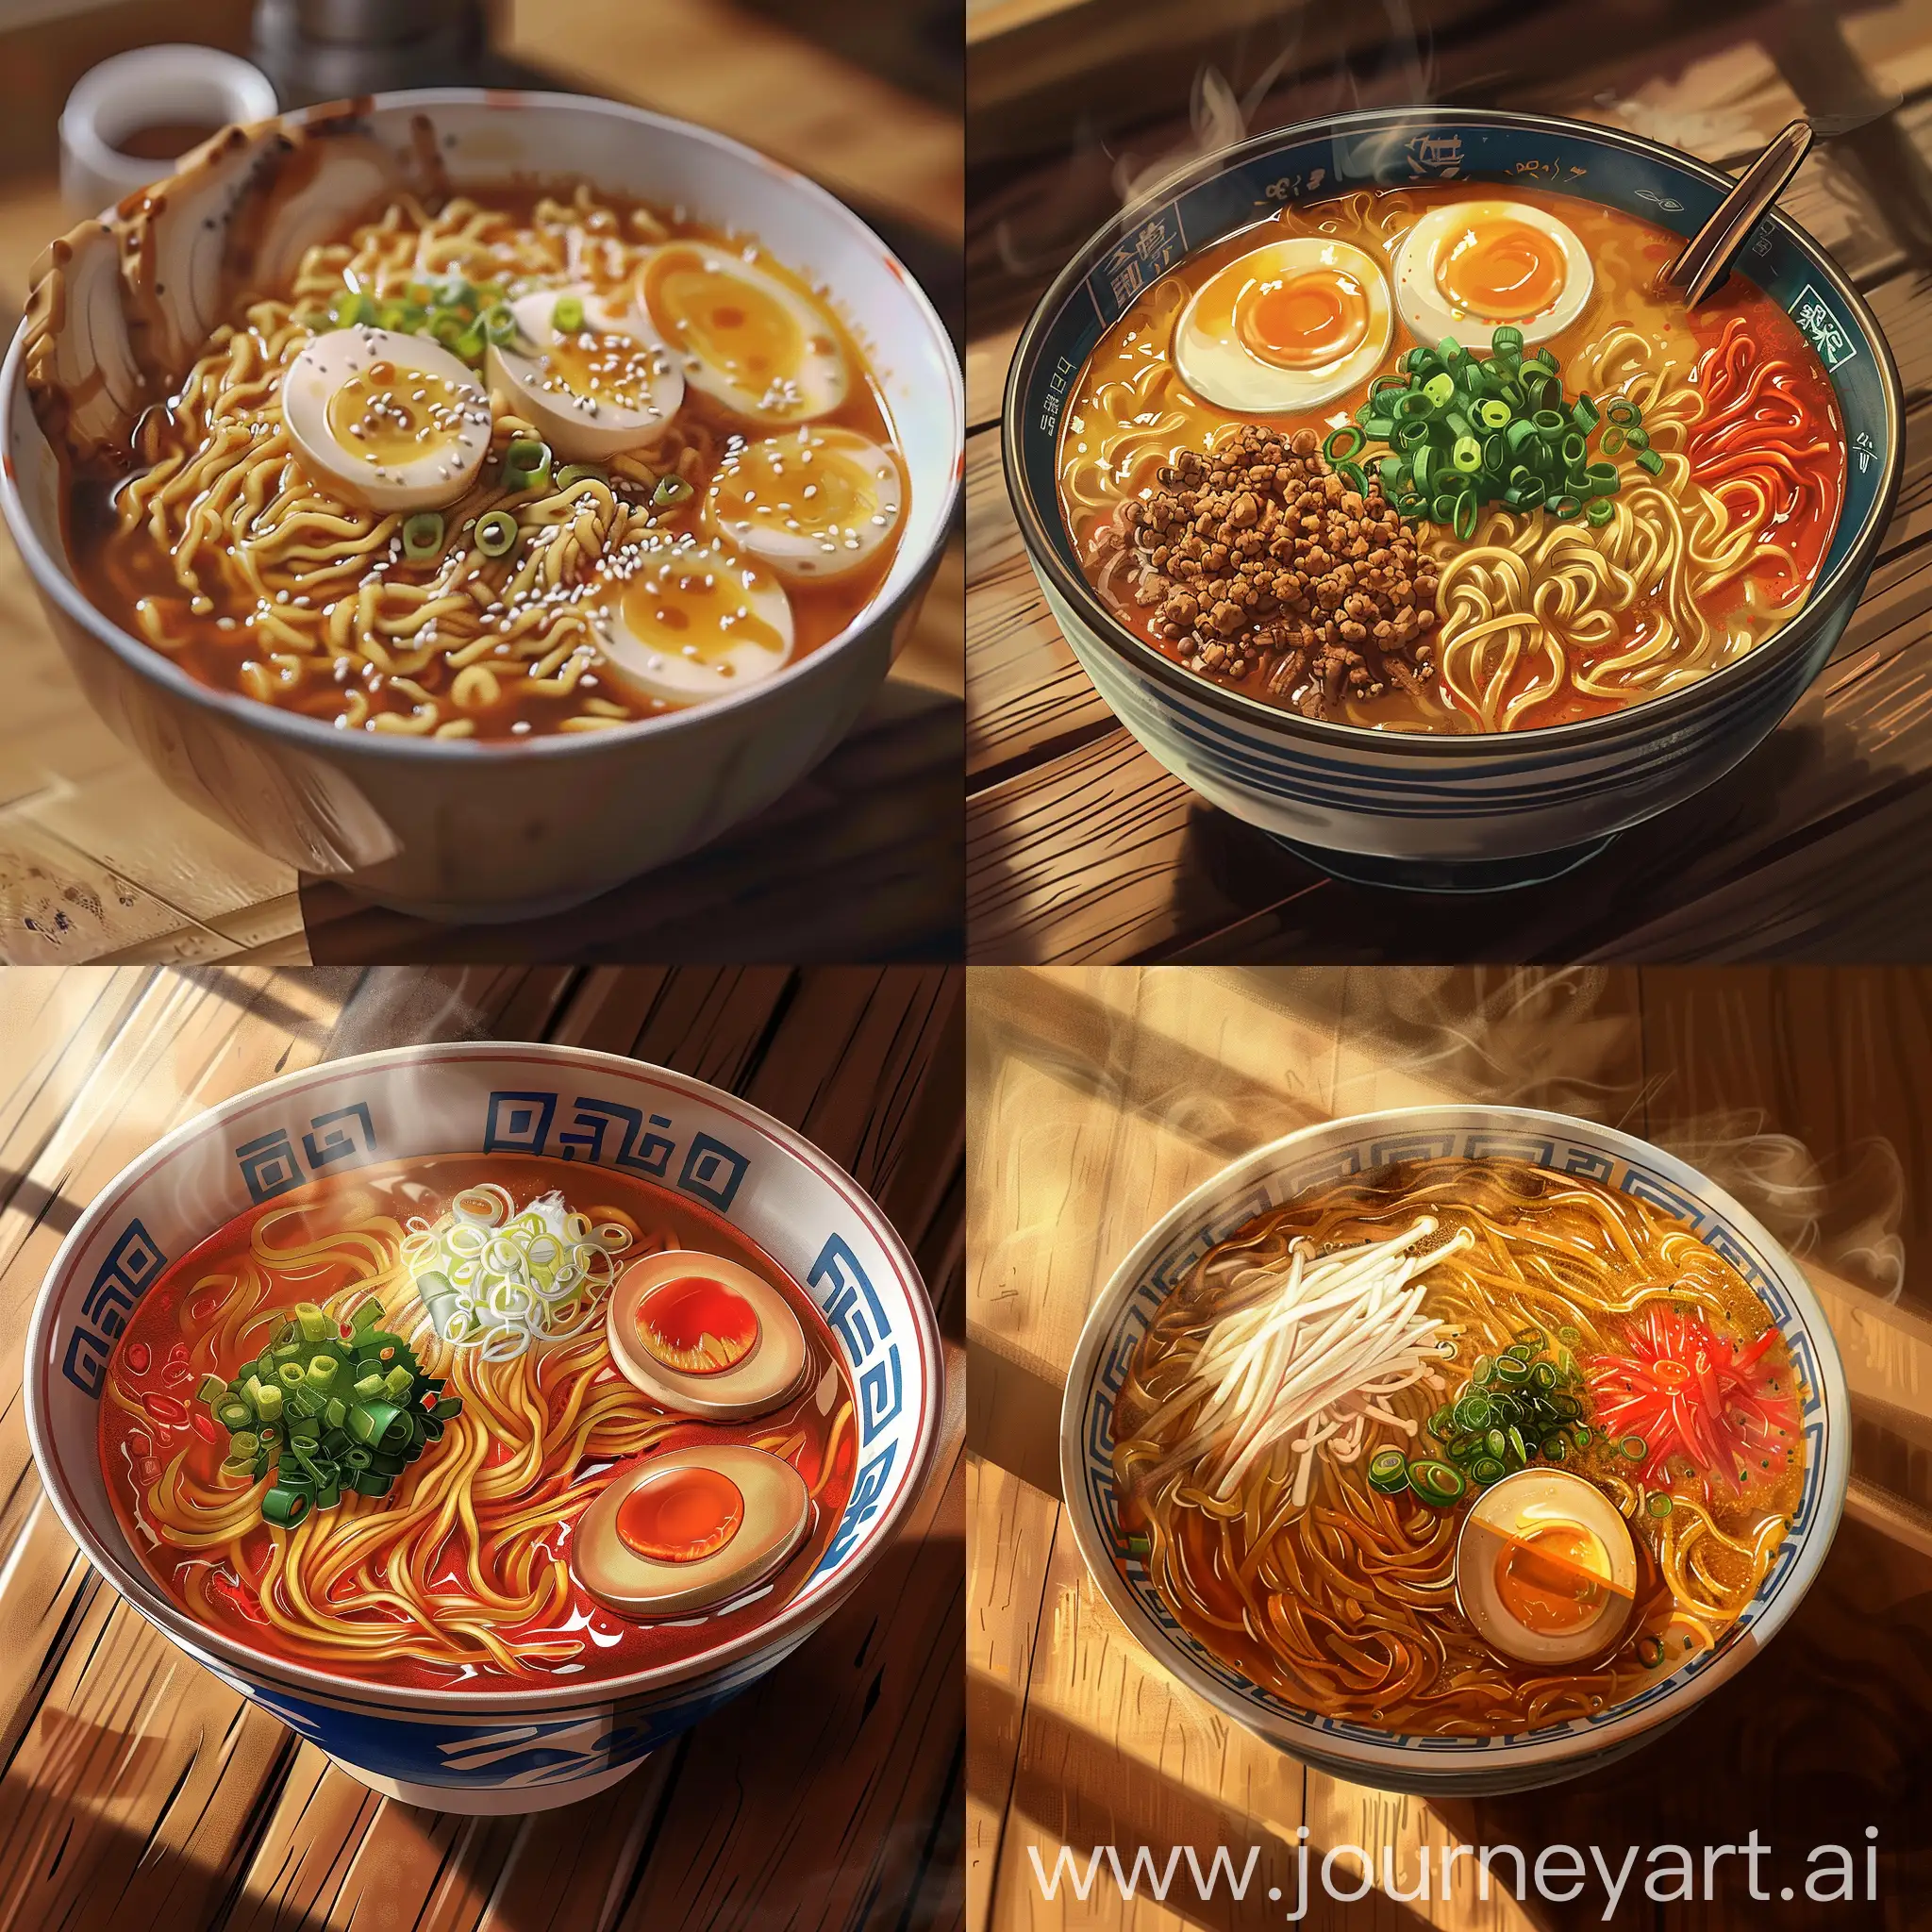 Delicious-Anime-Style-Ramen-Bowl-on-Wooden-Table